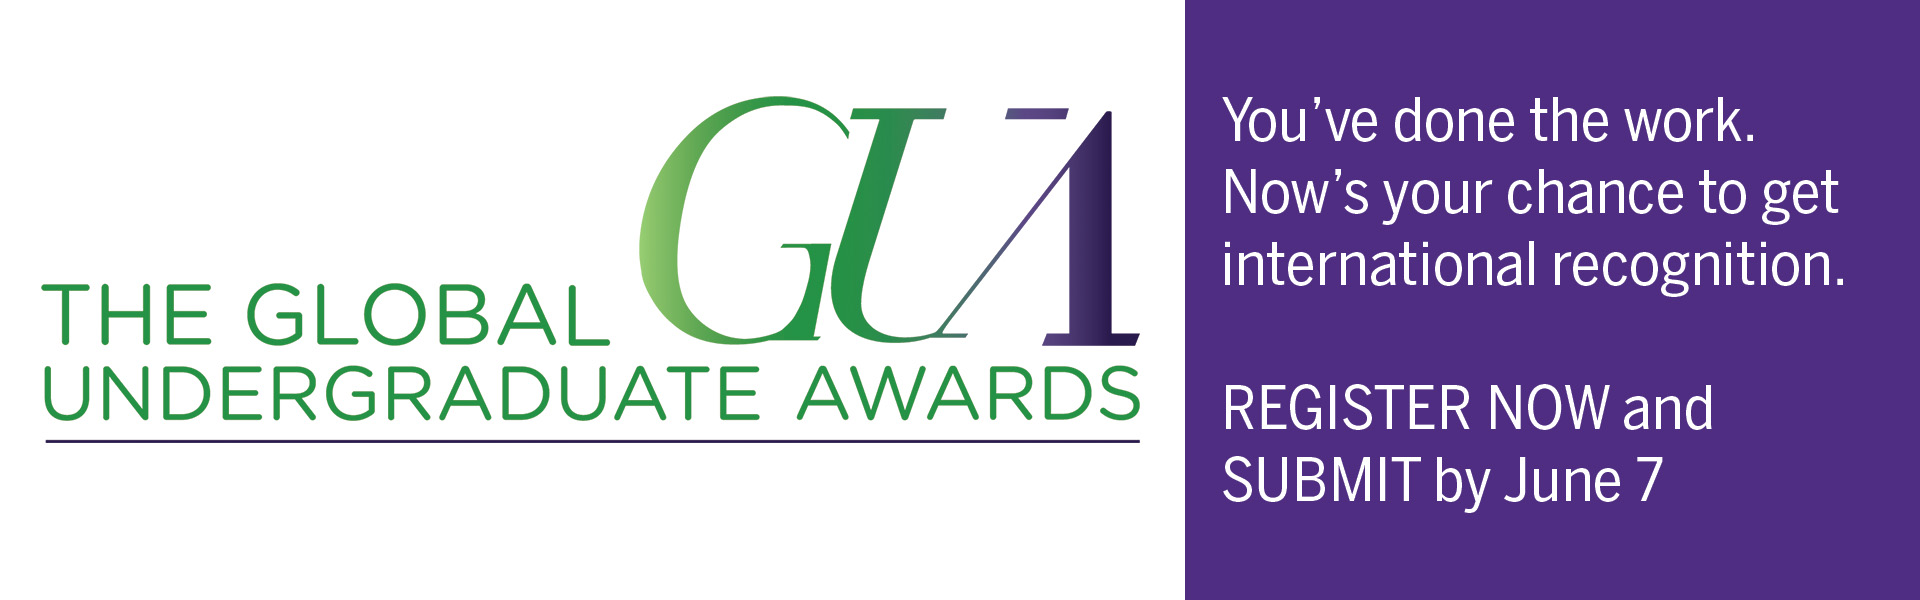 The Global Undergraduate Awards - text that says - "You've done the work. Now's your chance to get international recognition. Register now and submit by June 7"